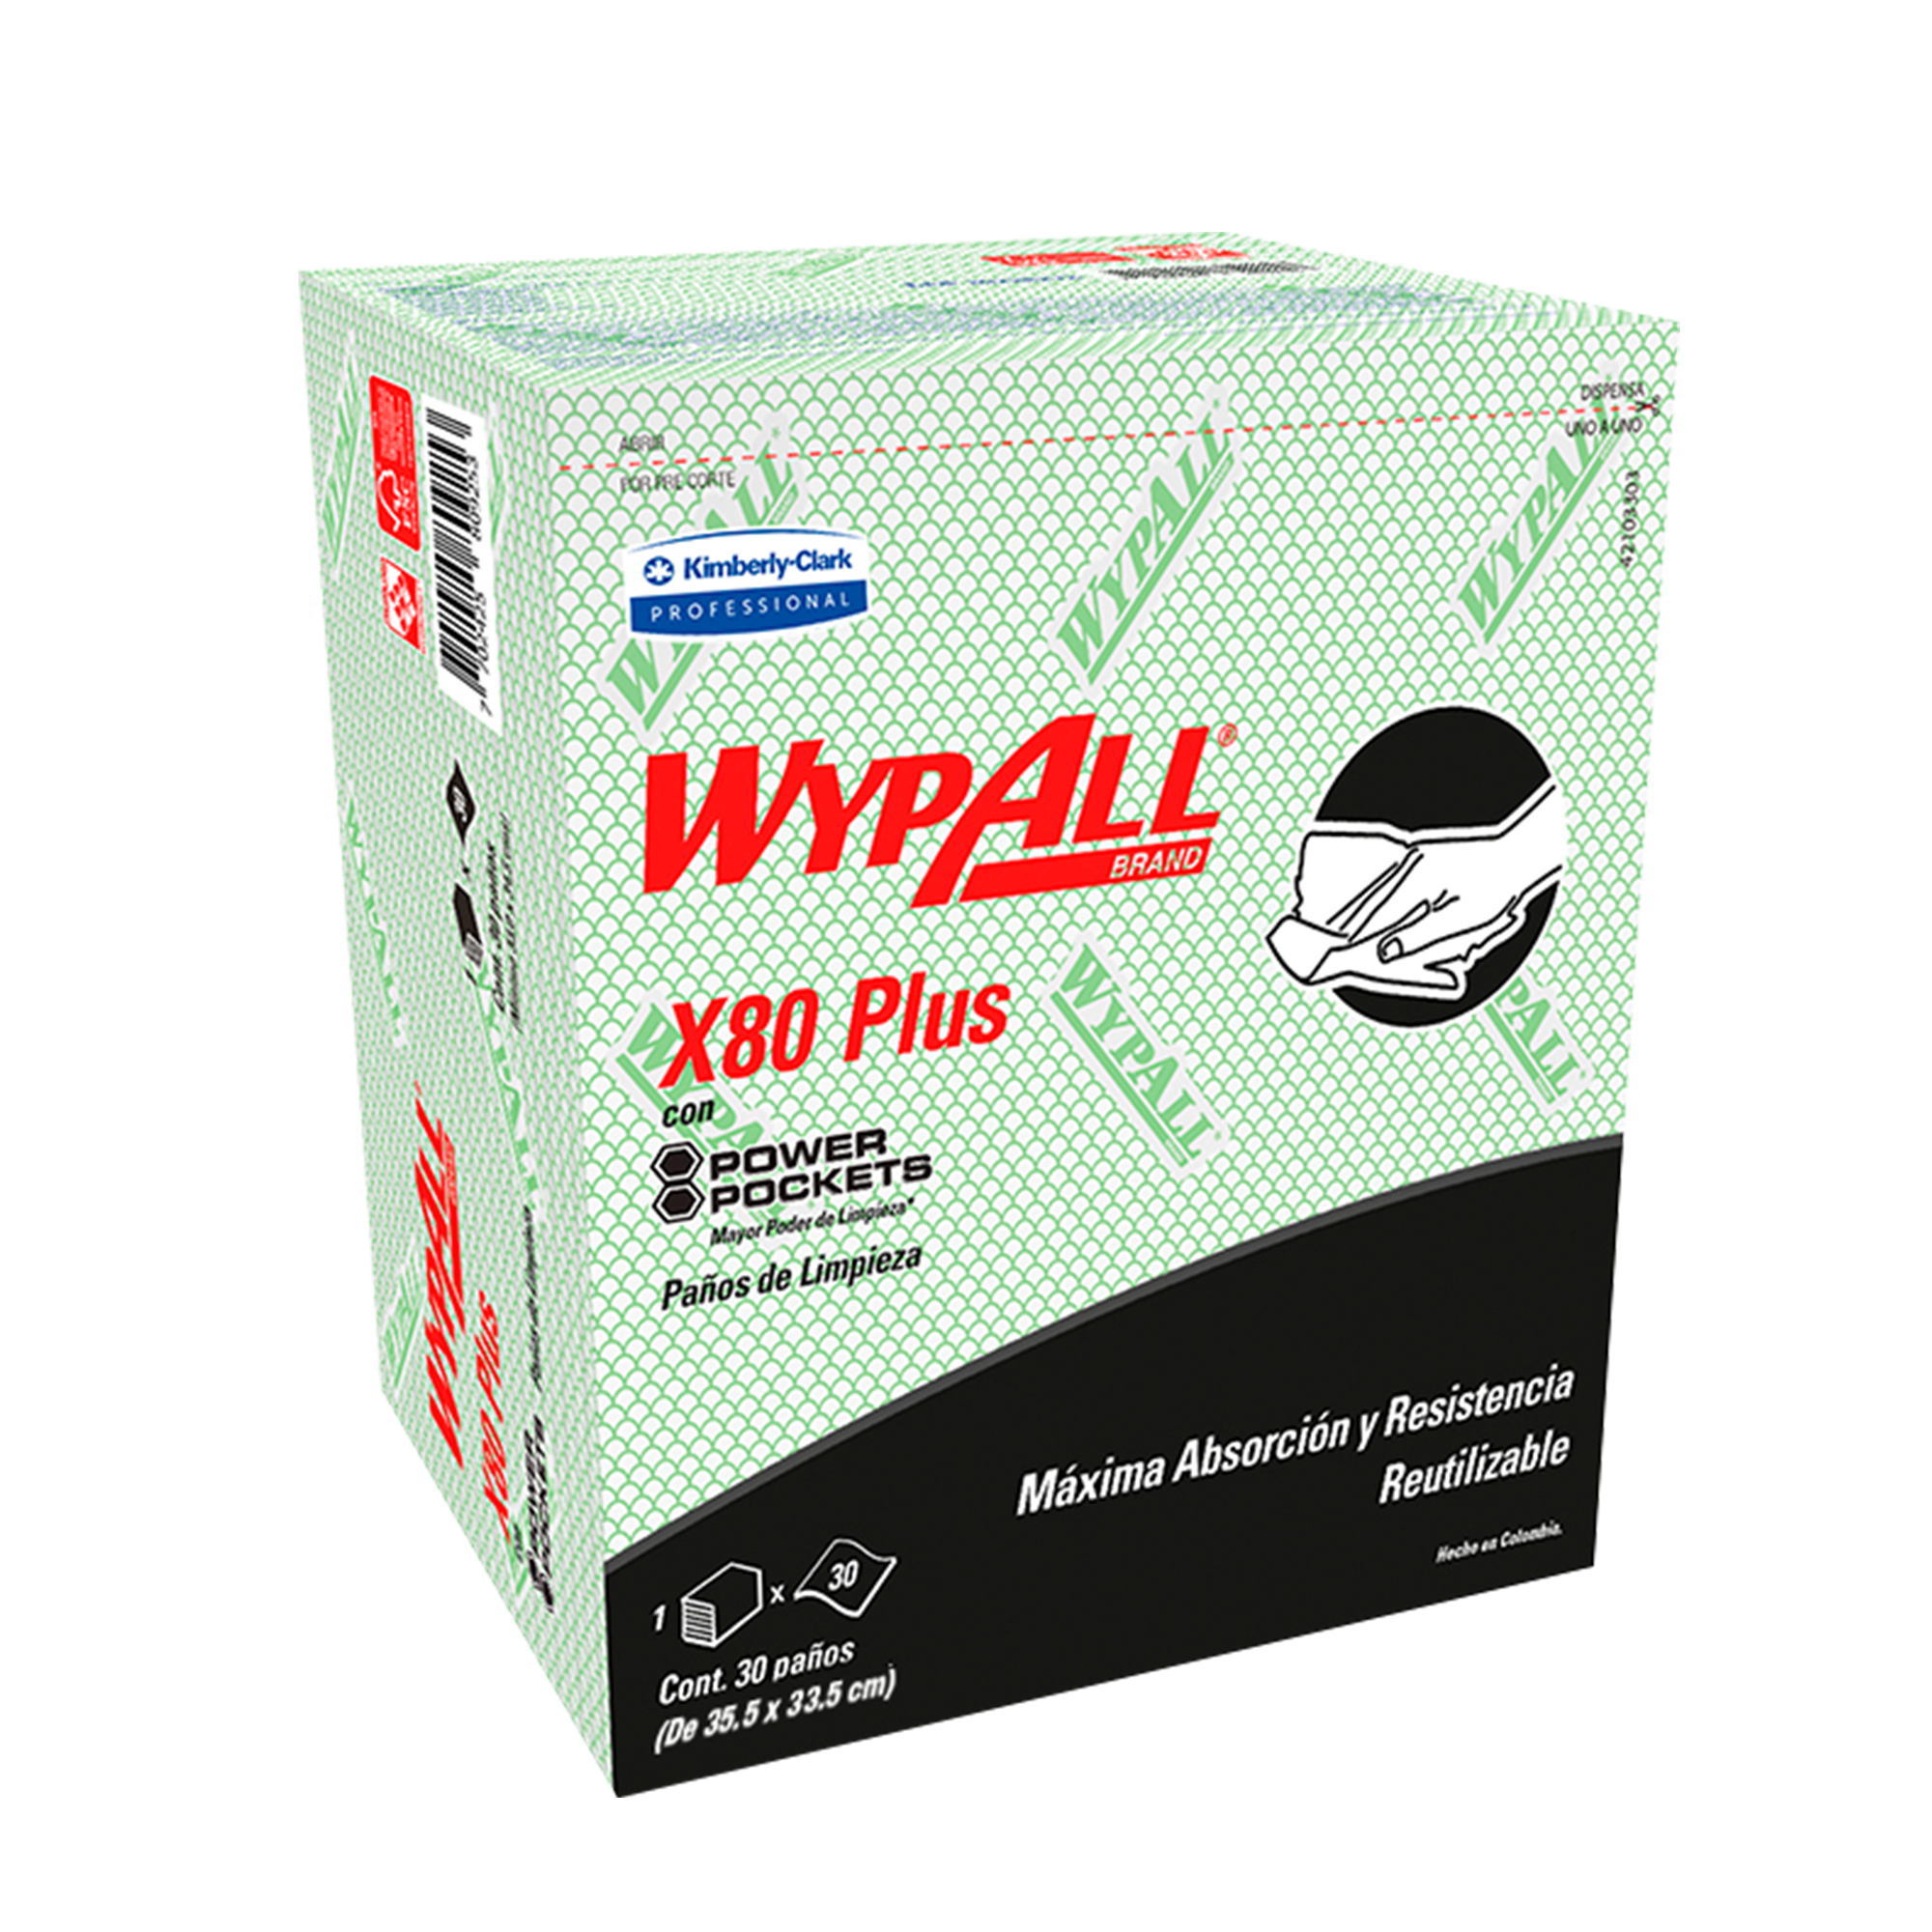 WYPALL® X80Plus Food Service Verde